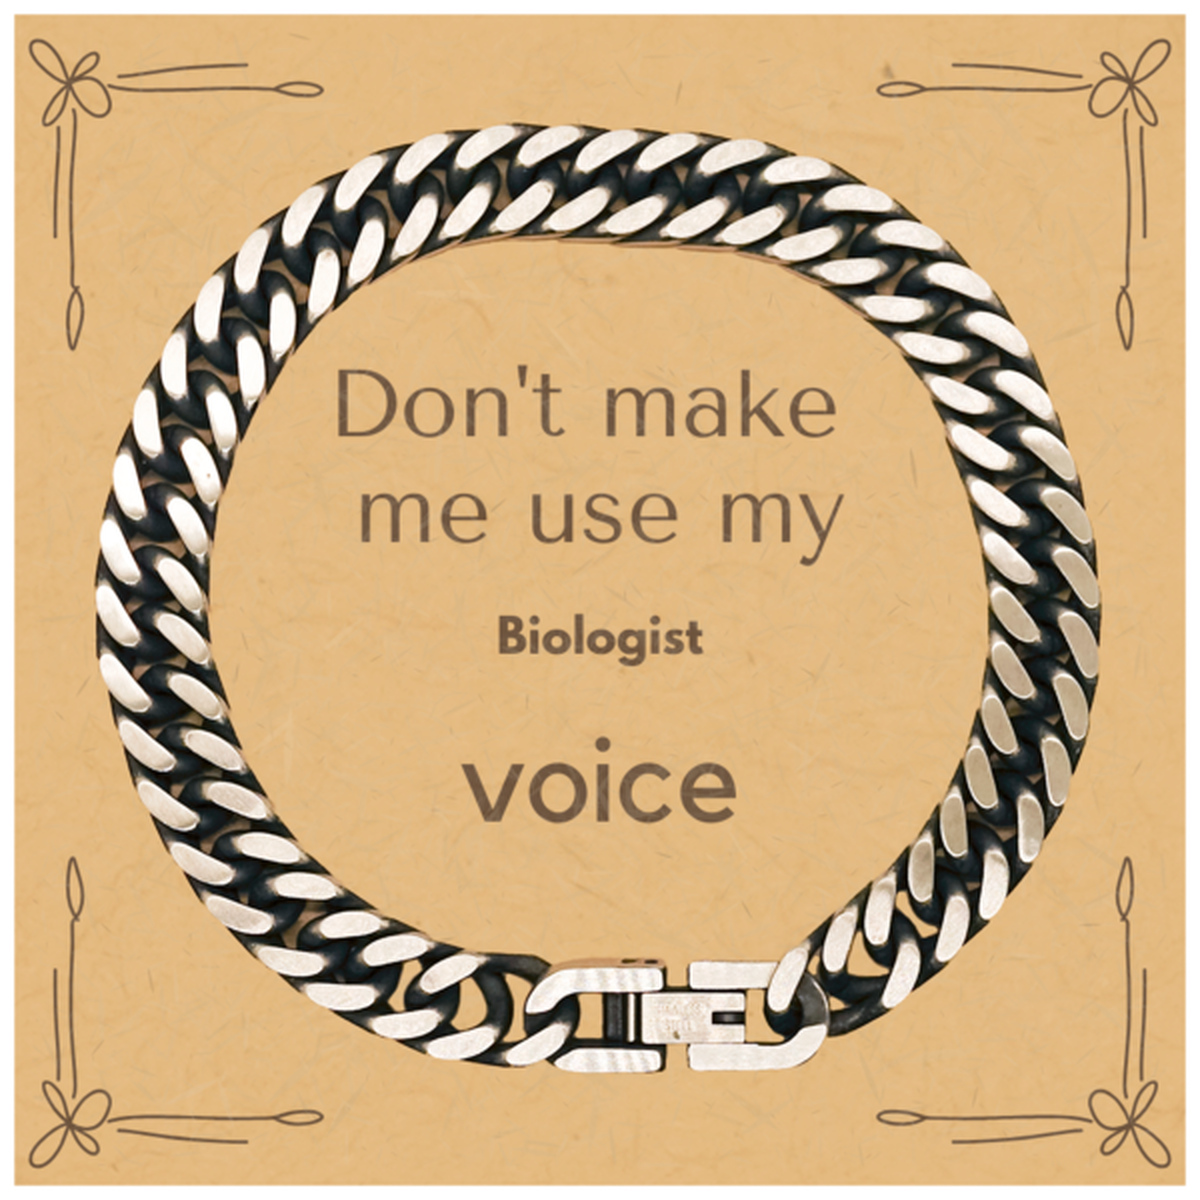 Don't make me use my Biologist voice, Sarcasm Biologist Card Gifts, Christmas Biologist Cuban Link Chain Bracelet Birthday Unique Gifts For Biologist Coworkers, Men, Women, Colleague, Friends